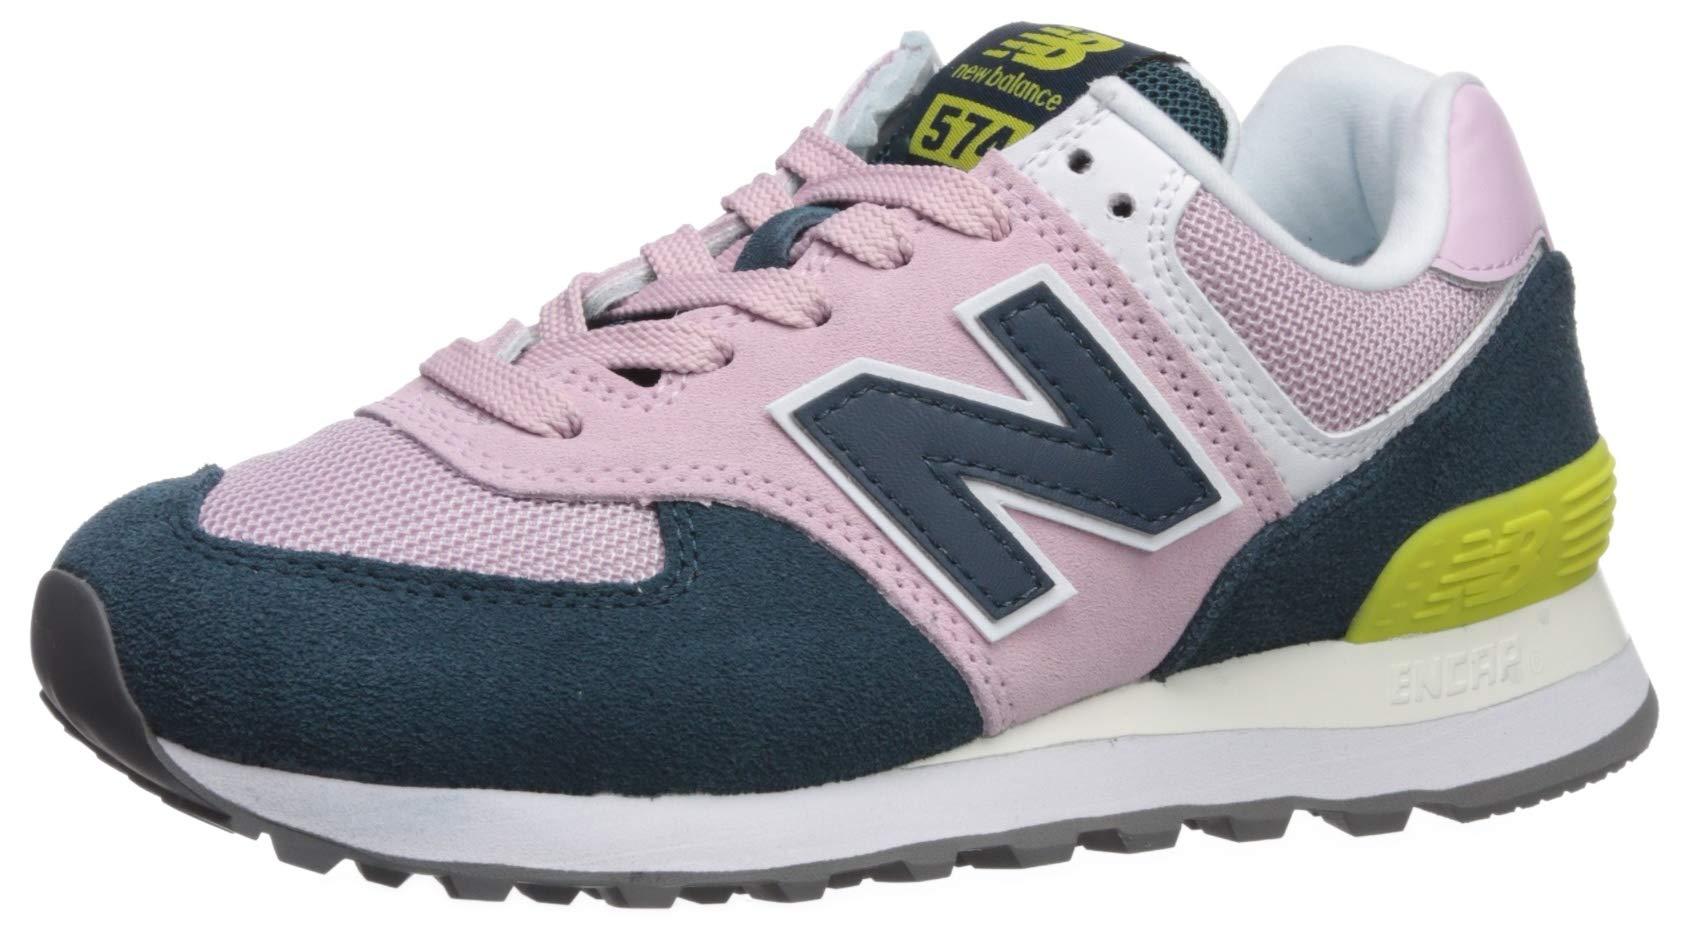 New Balance Rubber 574 V2 Sneaker in Pink - Save 44% - Lyst